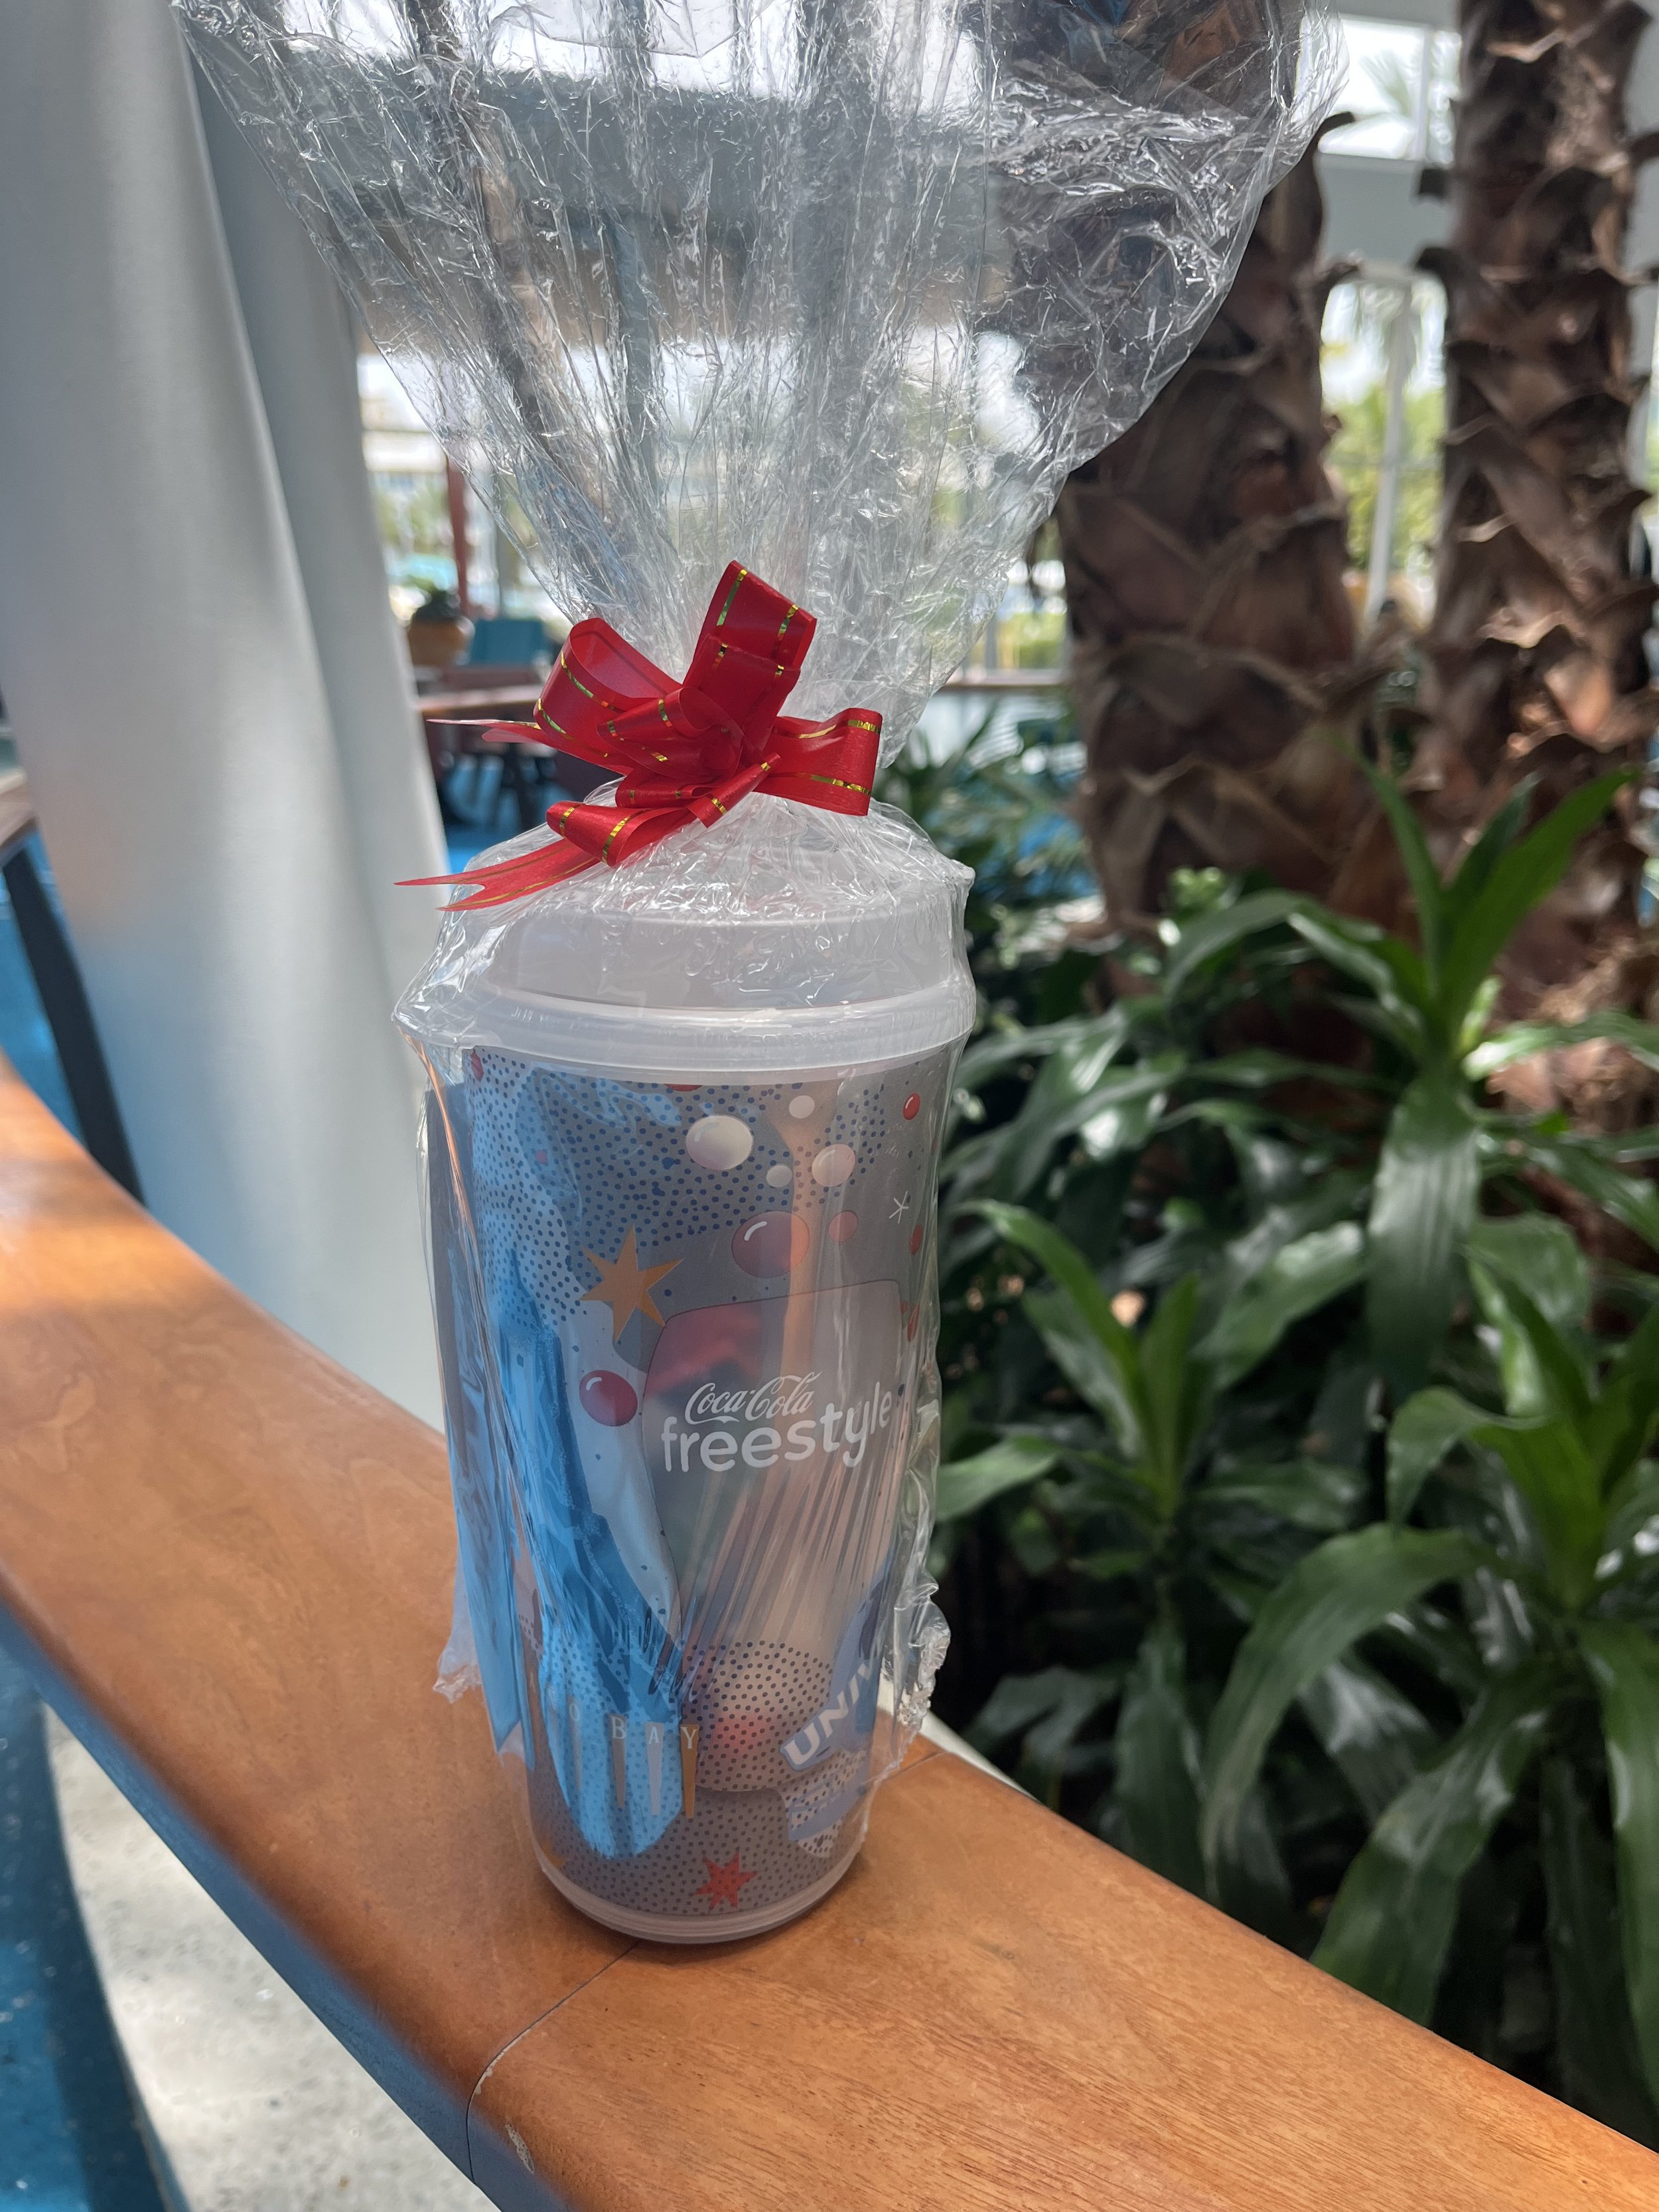 Universal Orlando Freestyle Cup Gift